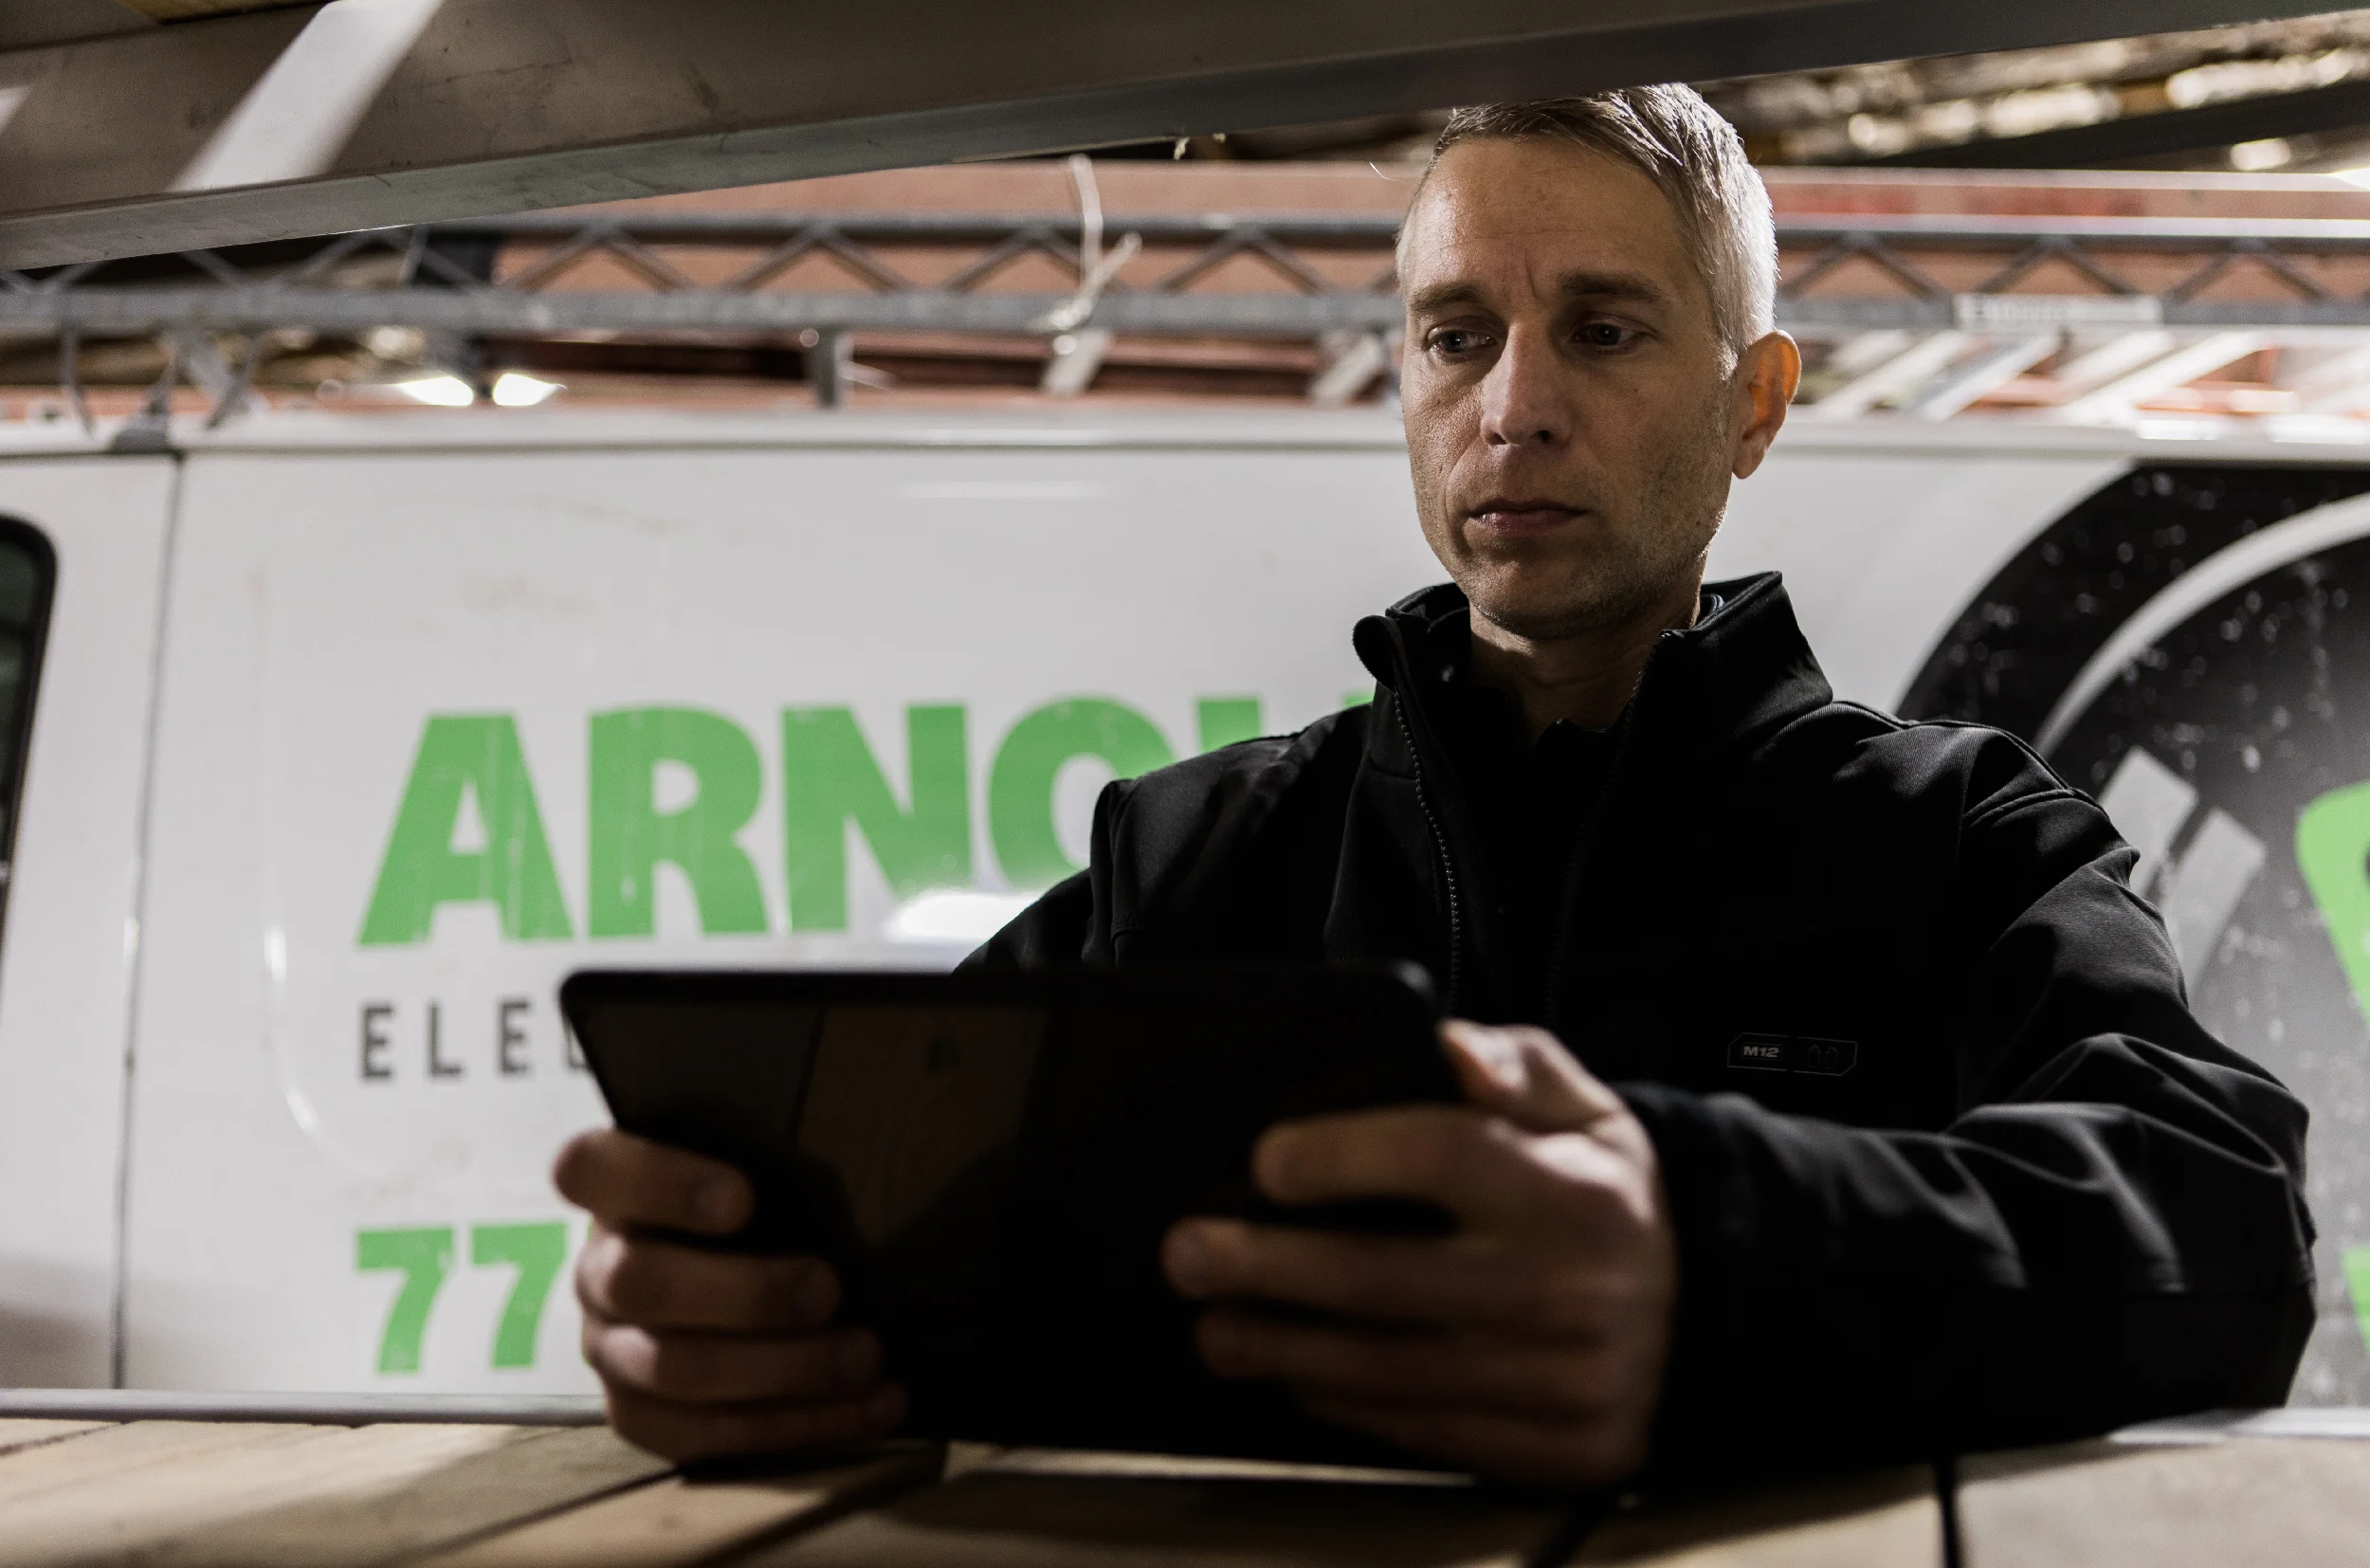 Arnold Electric electrician checking tablet with white work van in back